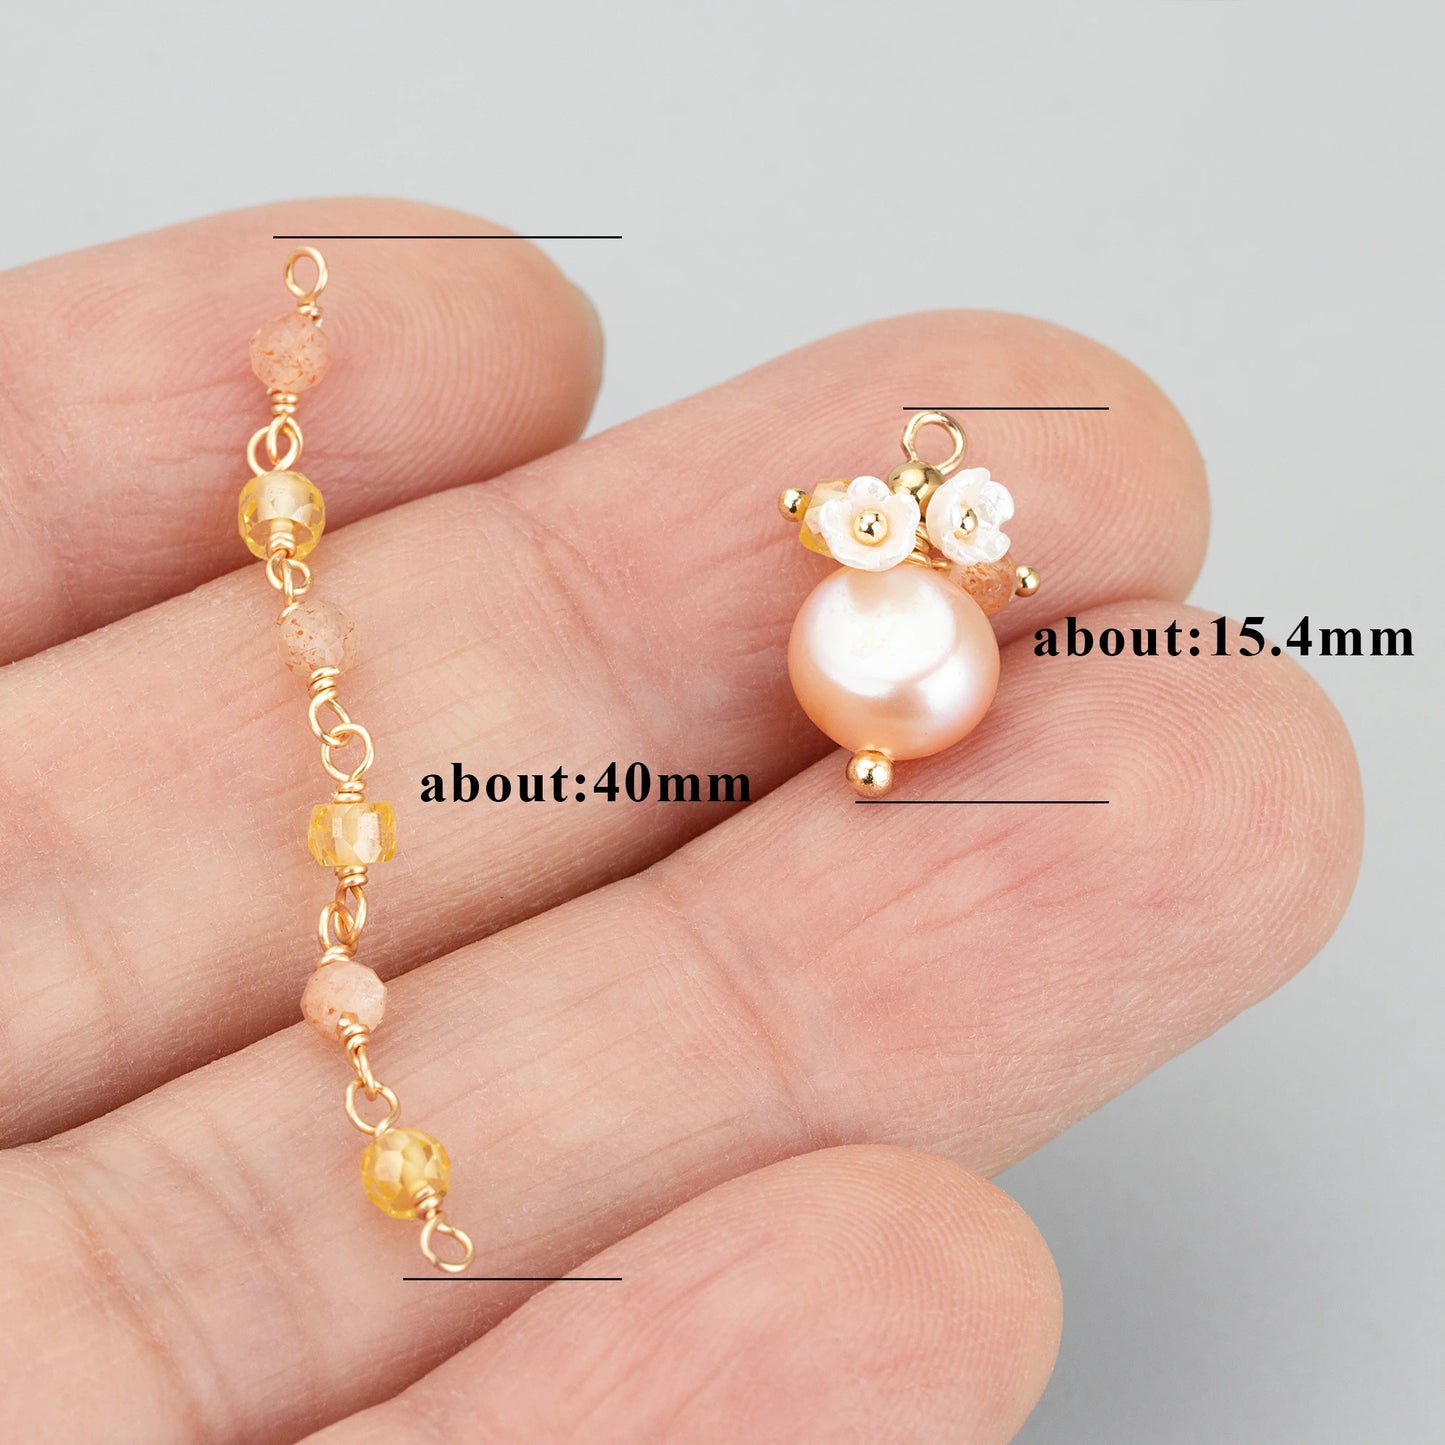 GUFEATHER ME43,jewelry accessories,18k gold plated,copper,natural pearl,hand made,charms,jewelry making,diy pendants,2pcs/lot